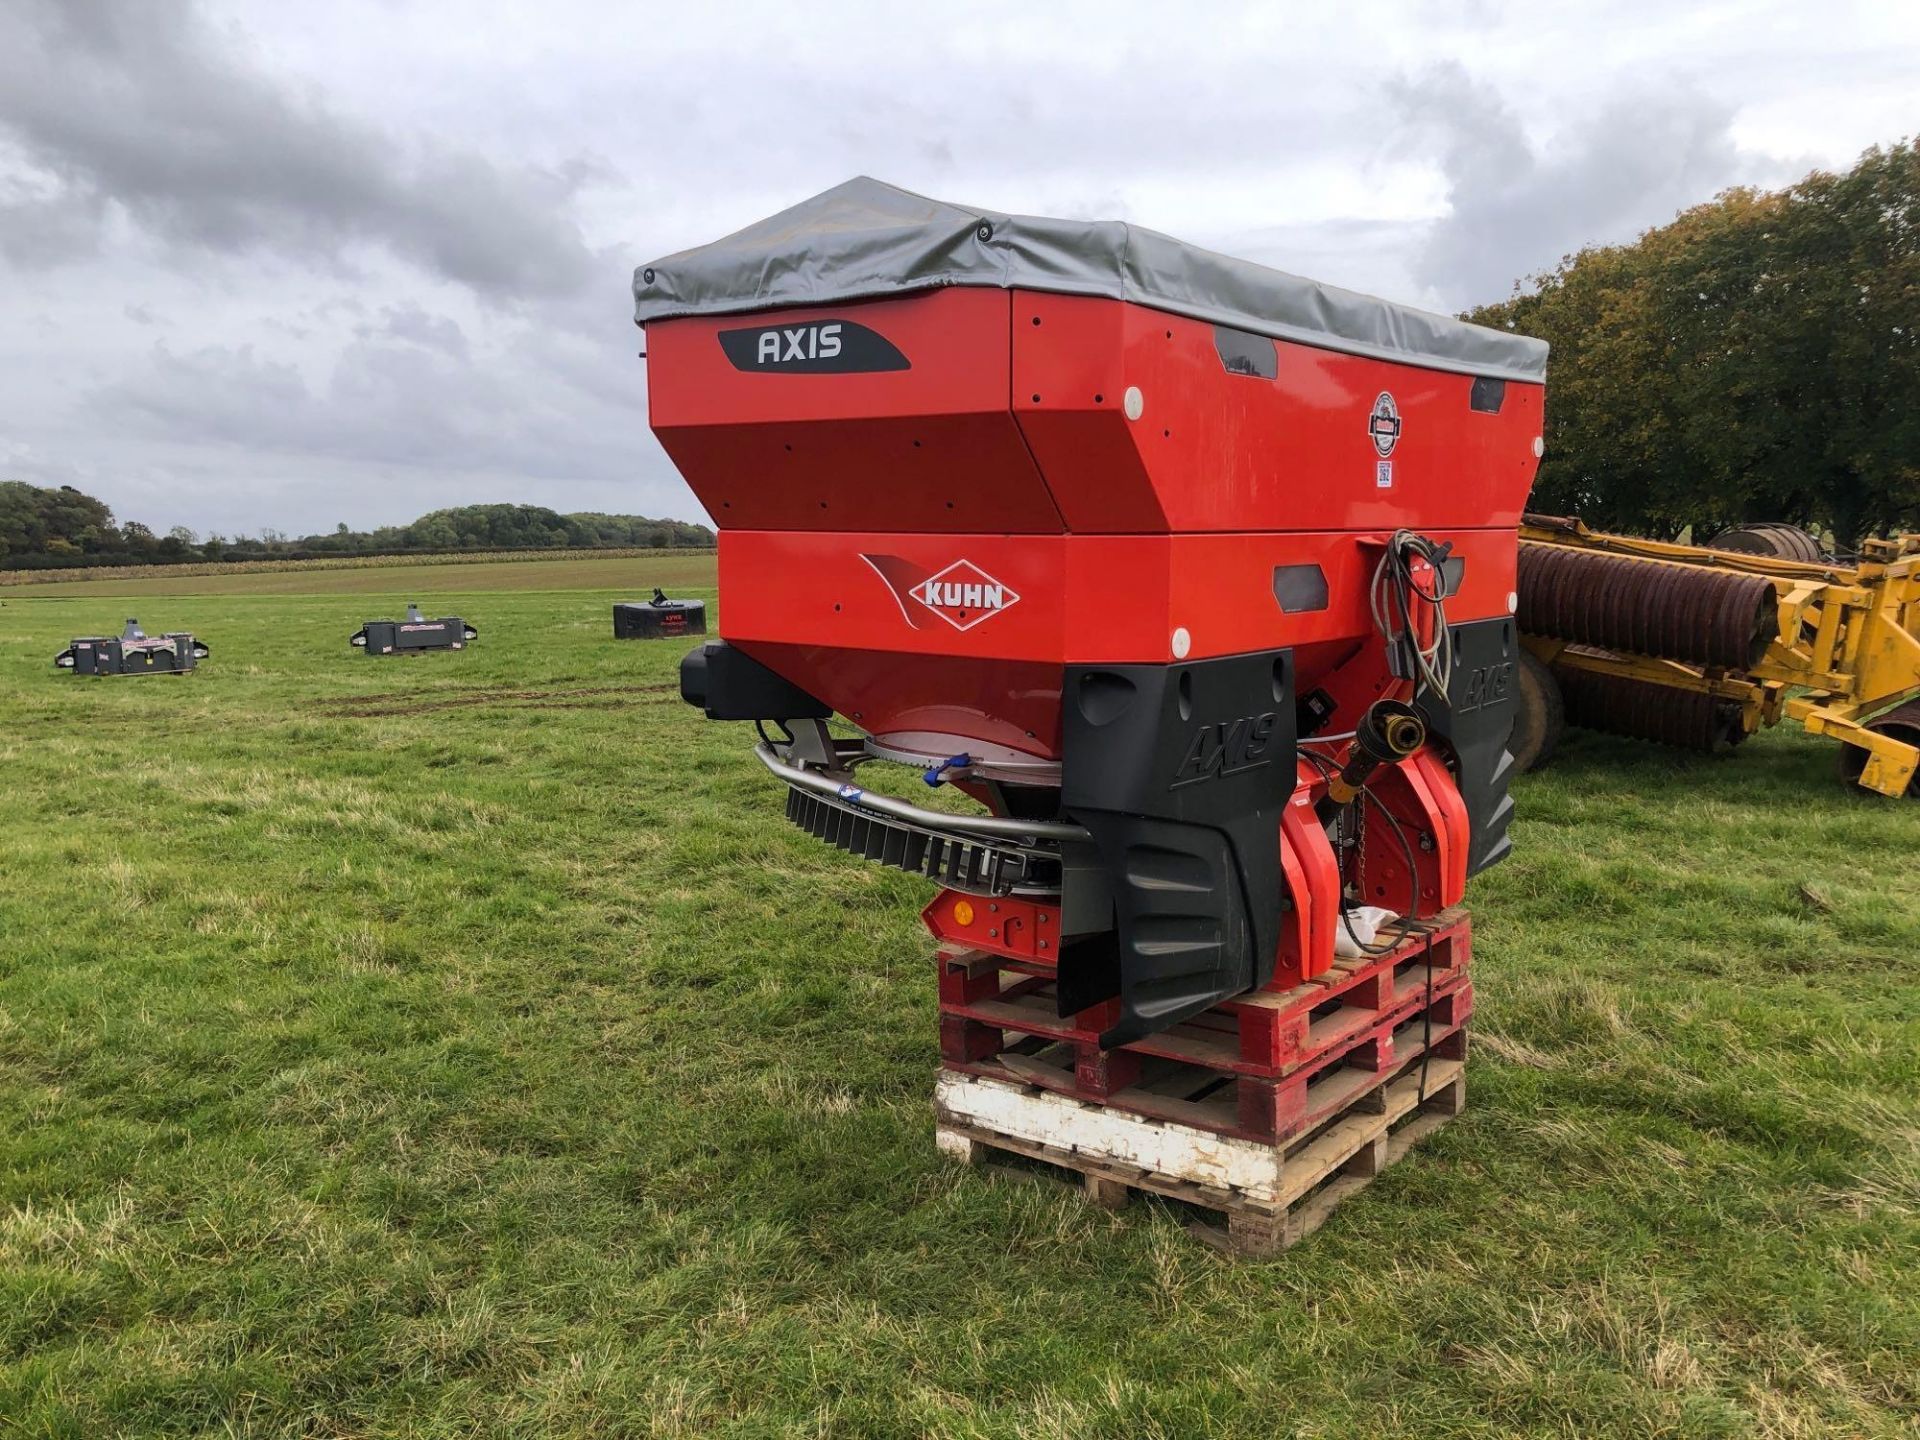 2016 Kuhn Axis-M 40.2 EMC 36m twin disc fertiliser spreader with border control. Serial No: 09-04626 - Image 13 of 13